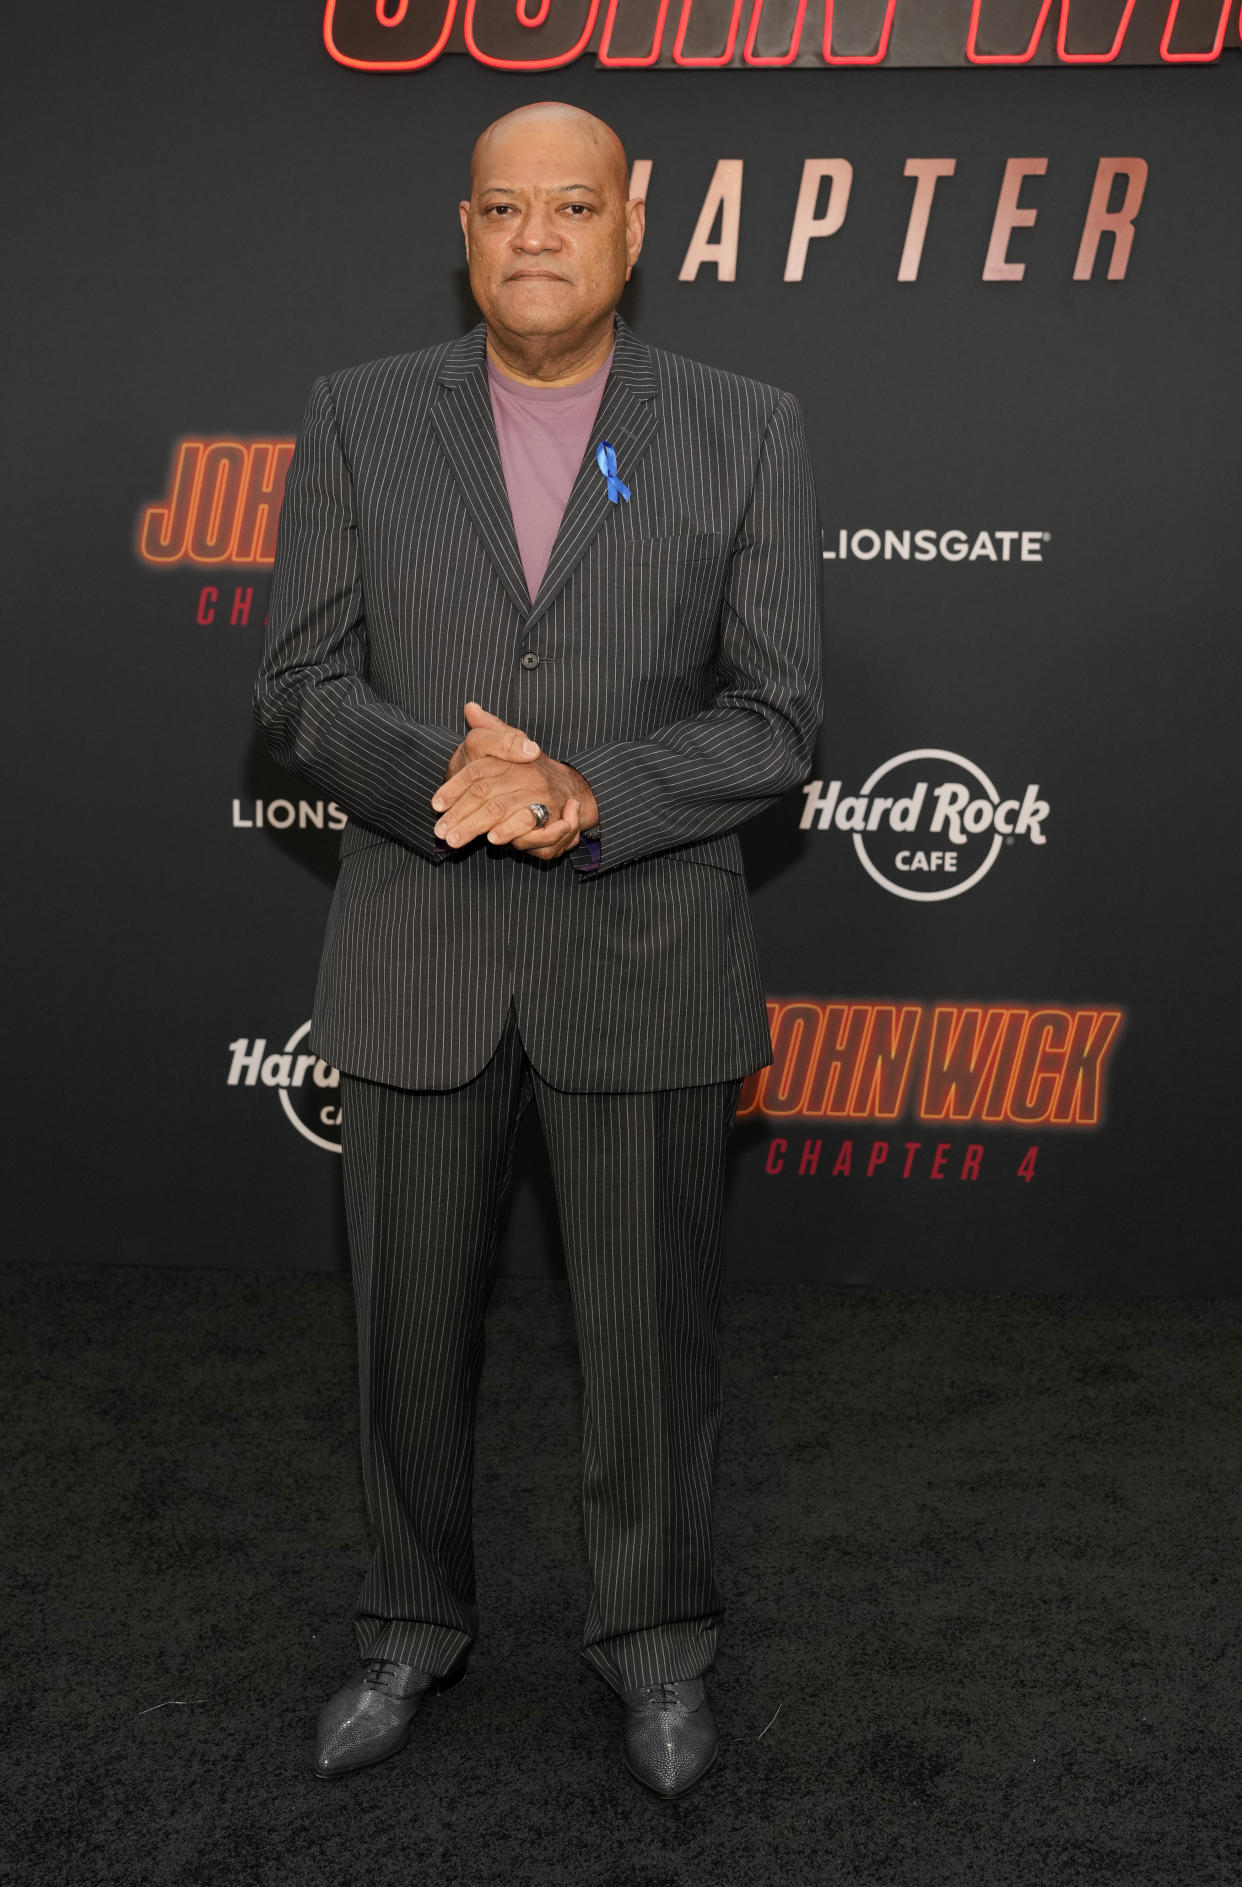 Laurence Fishburne, a cast member in "John Wick: Chapter 4," poses at the premiere of the film, Monday, March 20, 2023, at the TCL Chinese Theatre in Los Angeles. (AP Photo/Chris Pizzello)